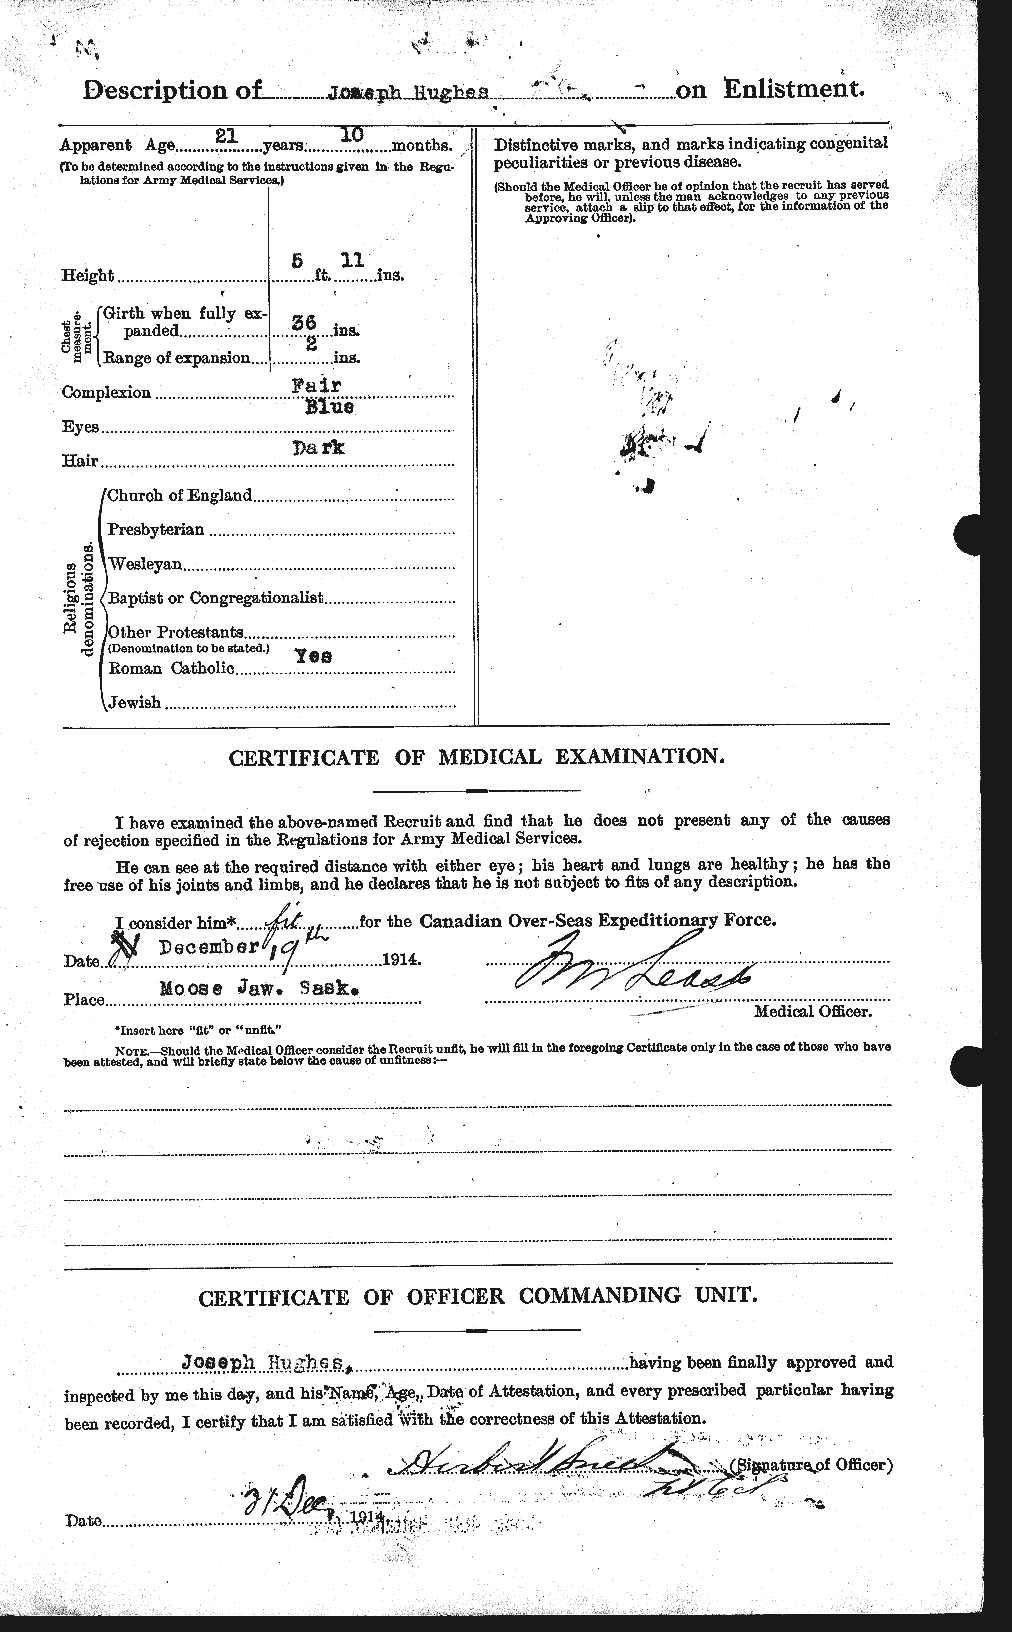 Personnel Records of the First World War - CEF 404070b